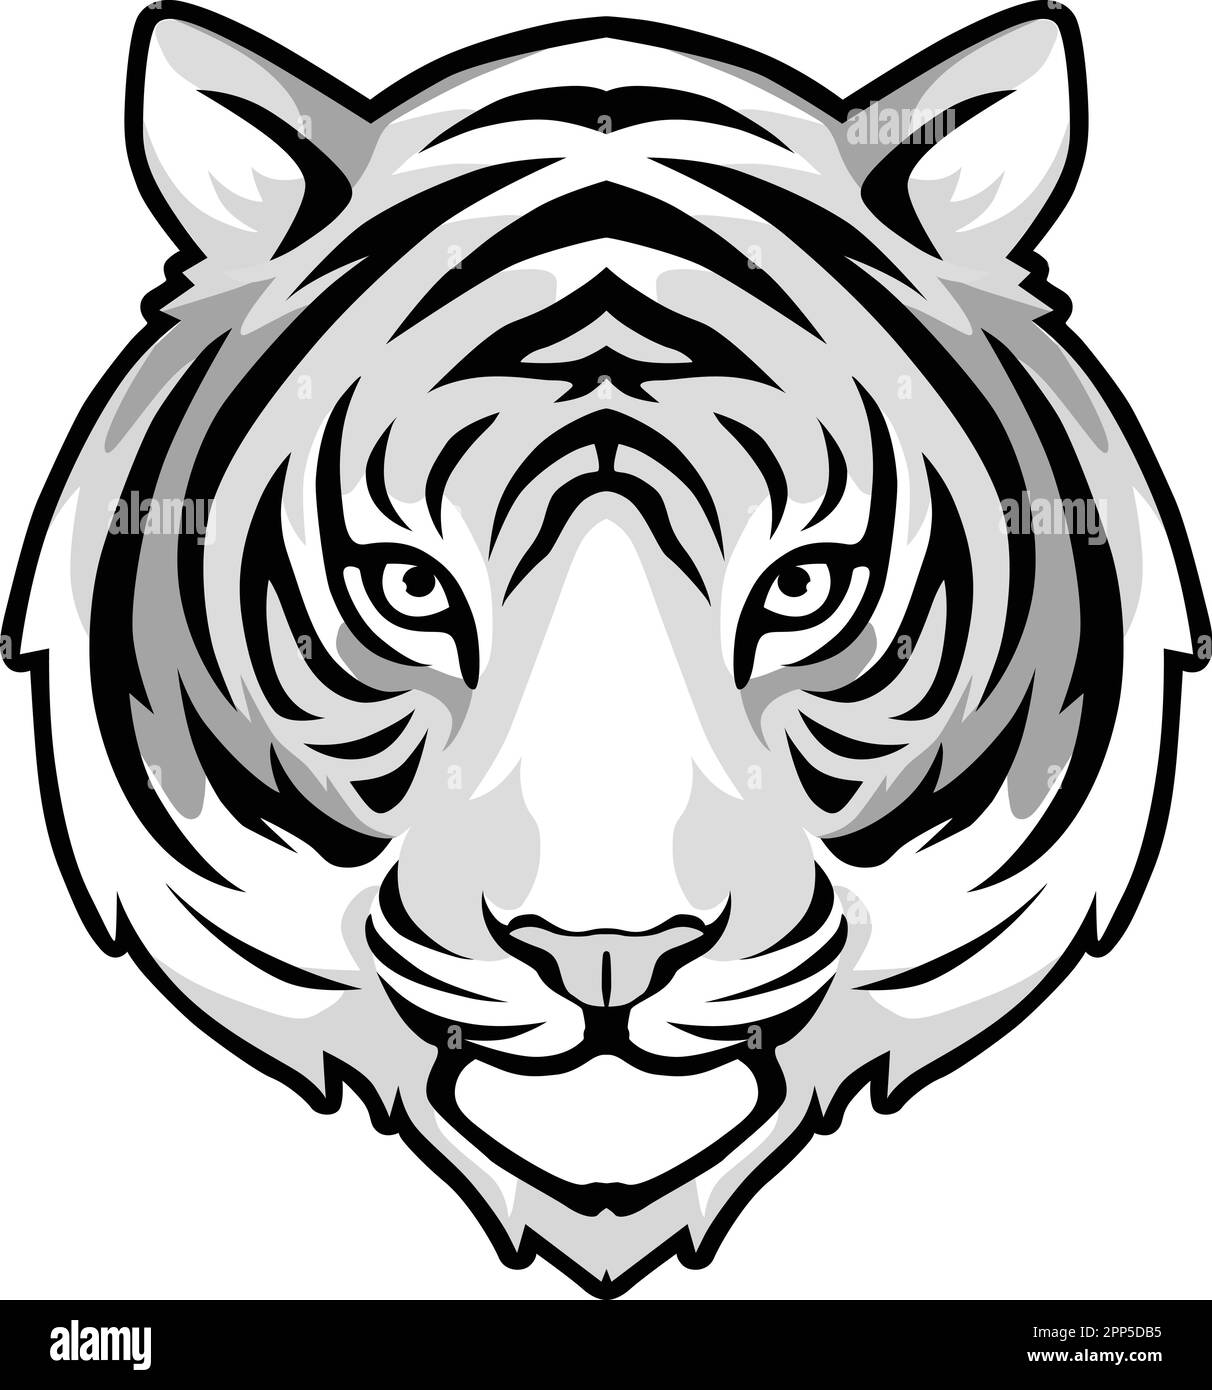 Prowling Tiger Mascot  Production Ready Artwork for T-Shirt Printing